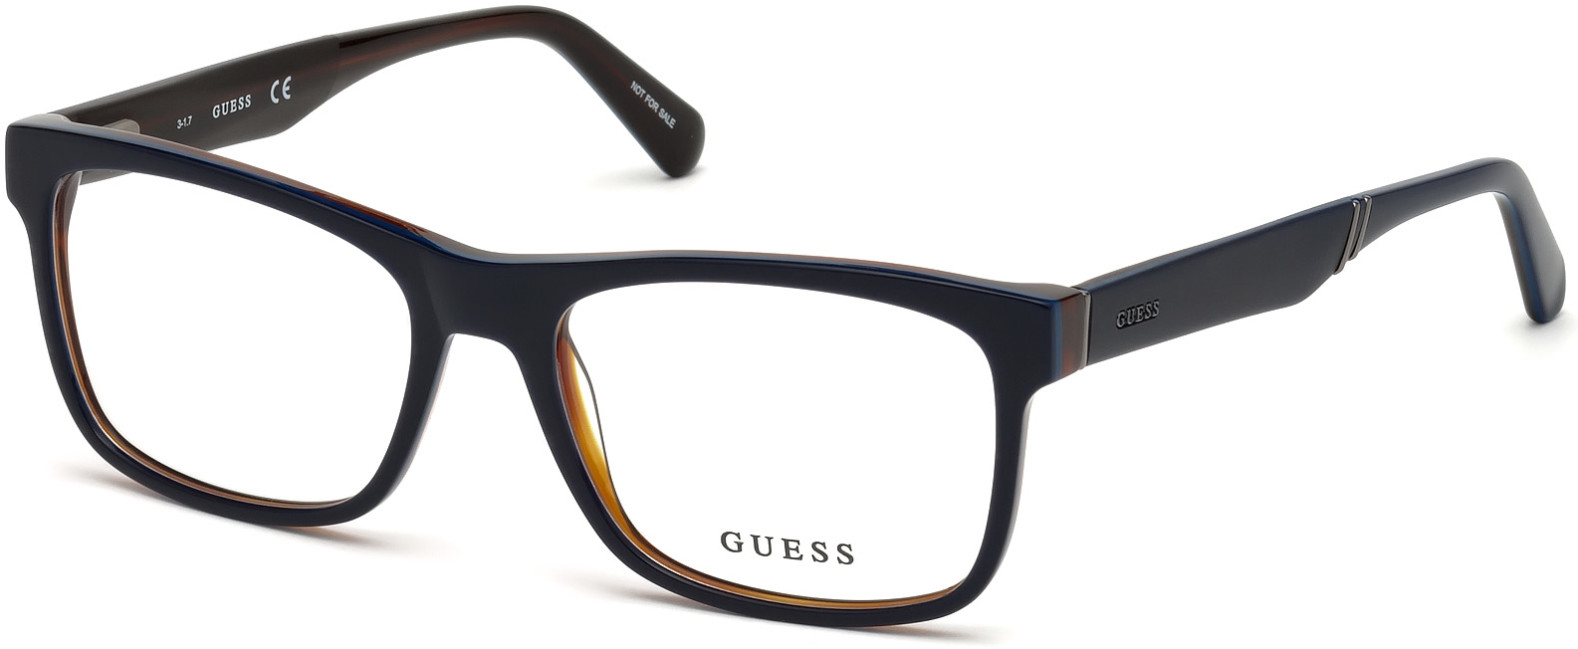 GUESS 1943 091